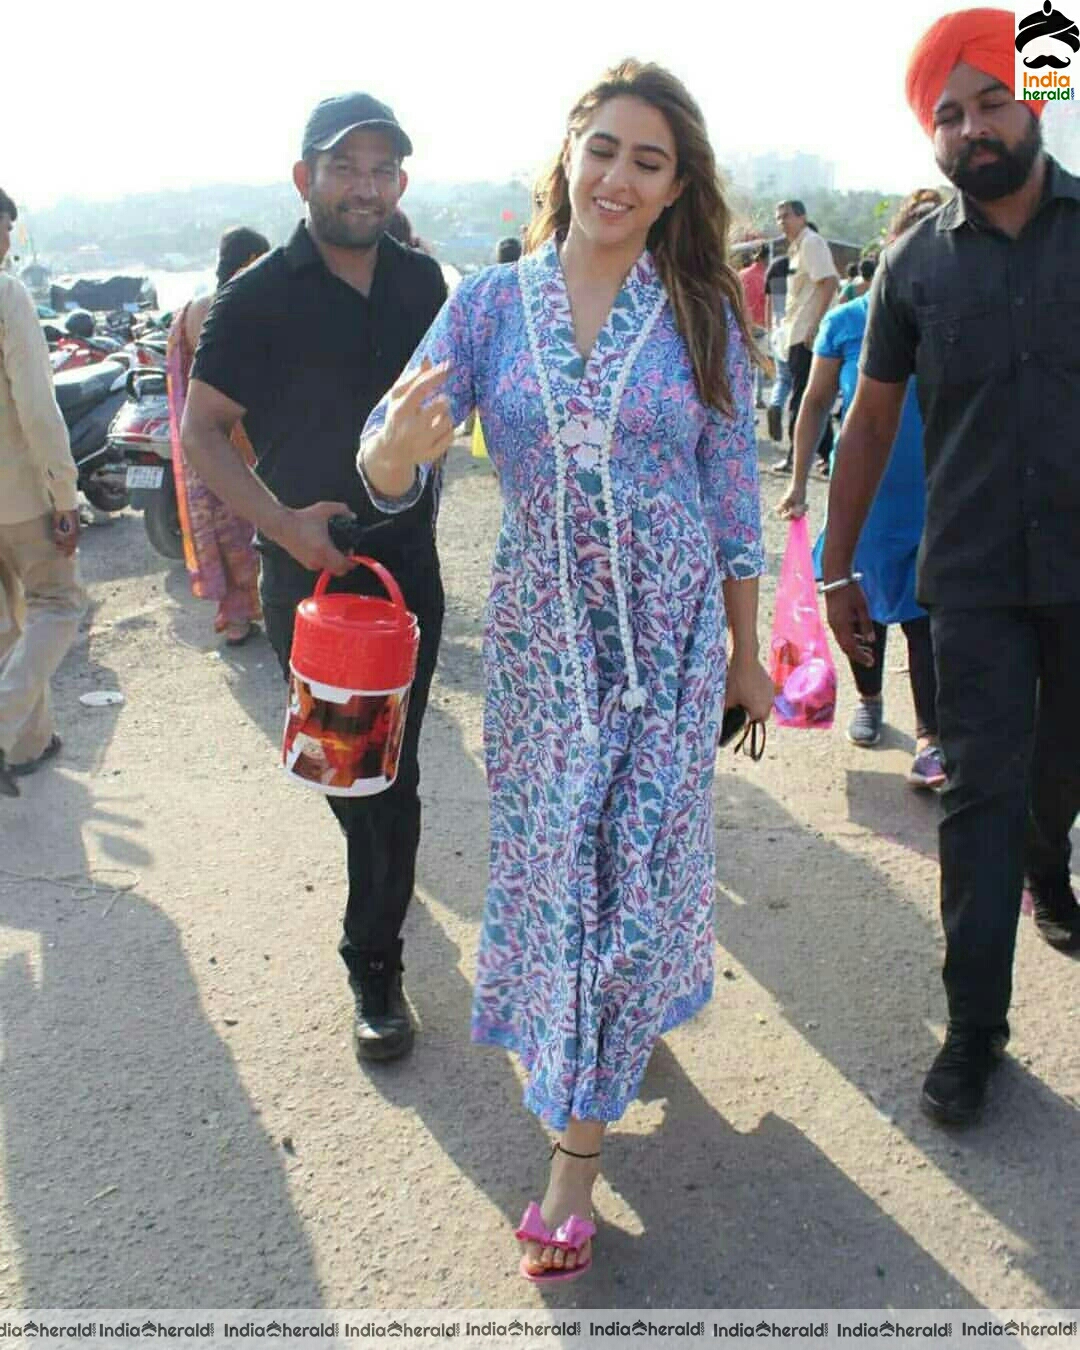 Sara Ali Khan Cute In Frock While Spotted Outside In Beach